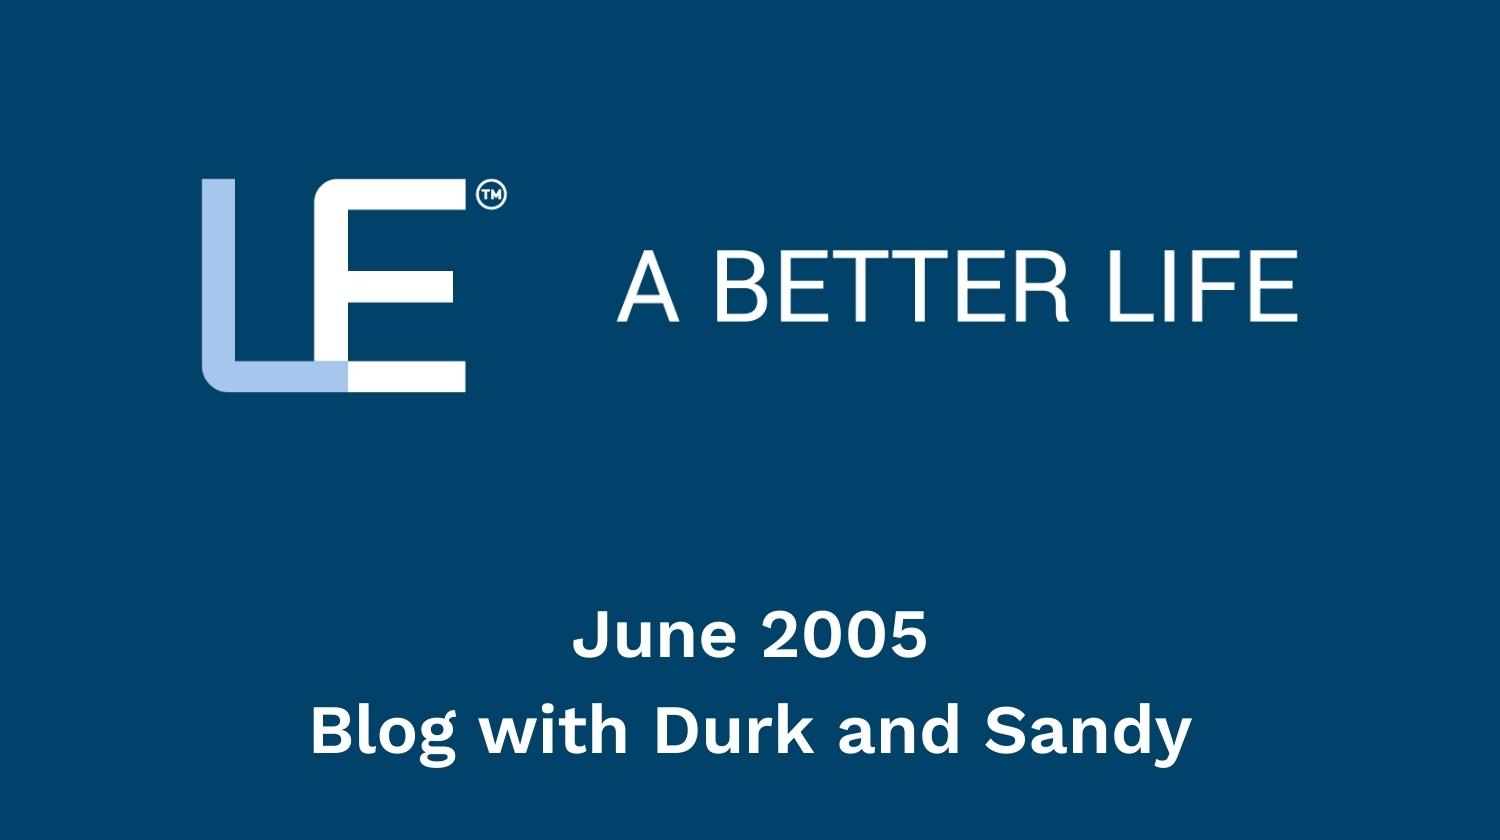 June 2005 Blog with Durk and Sandy